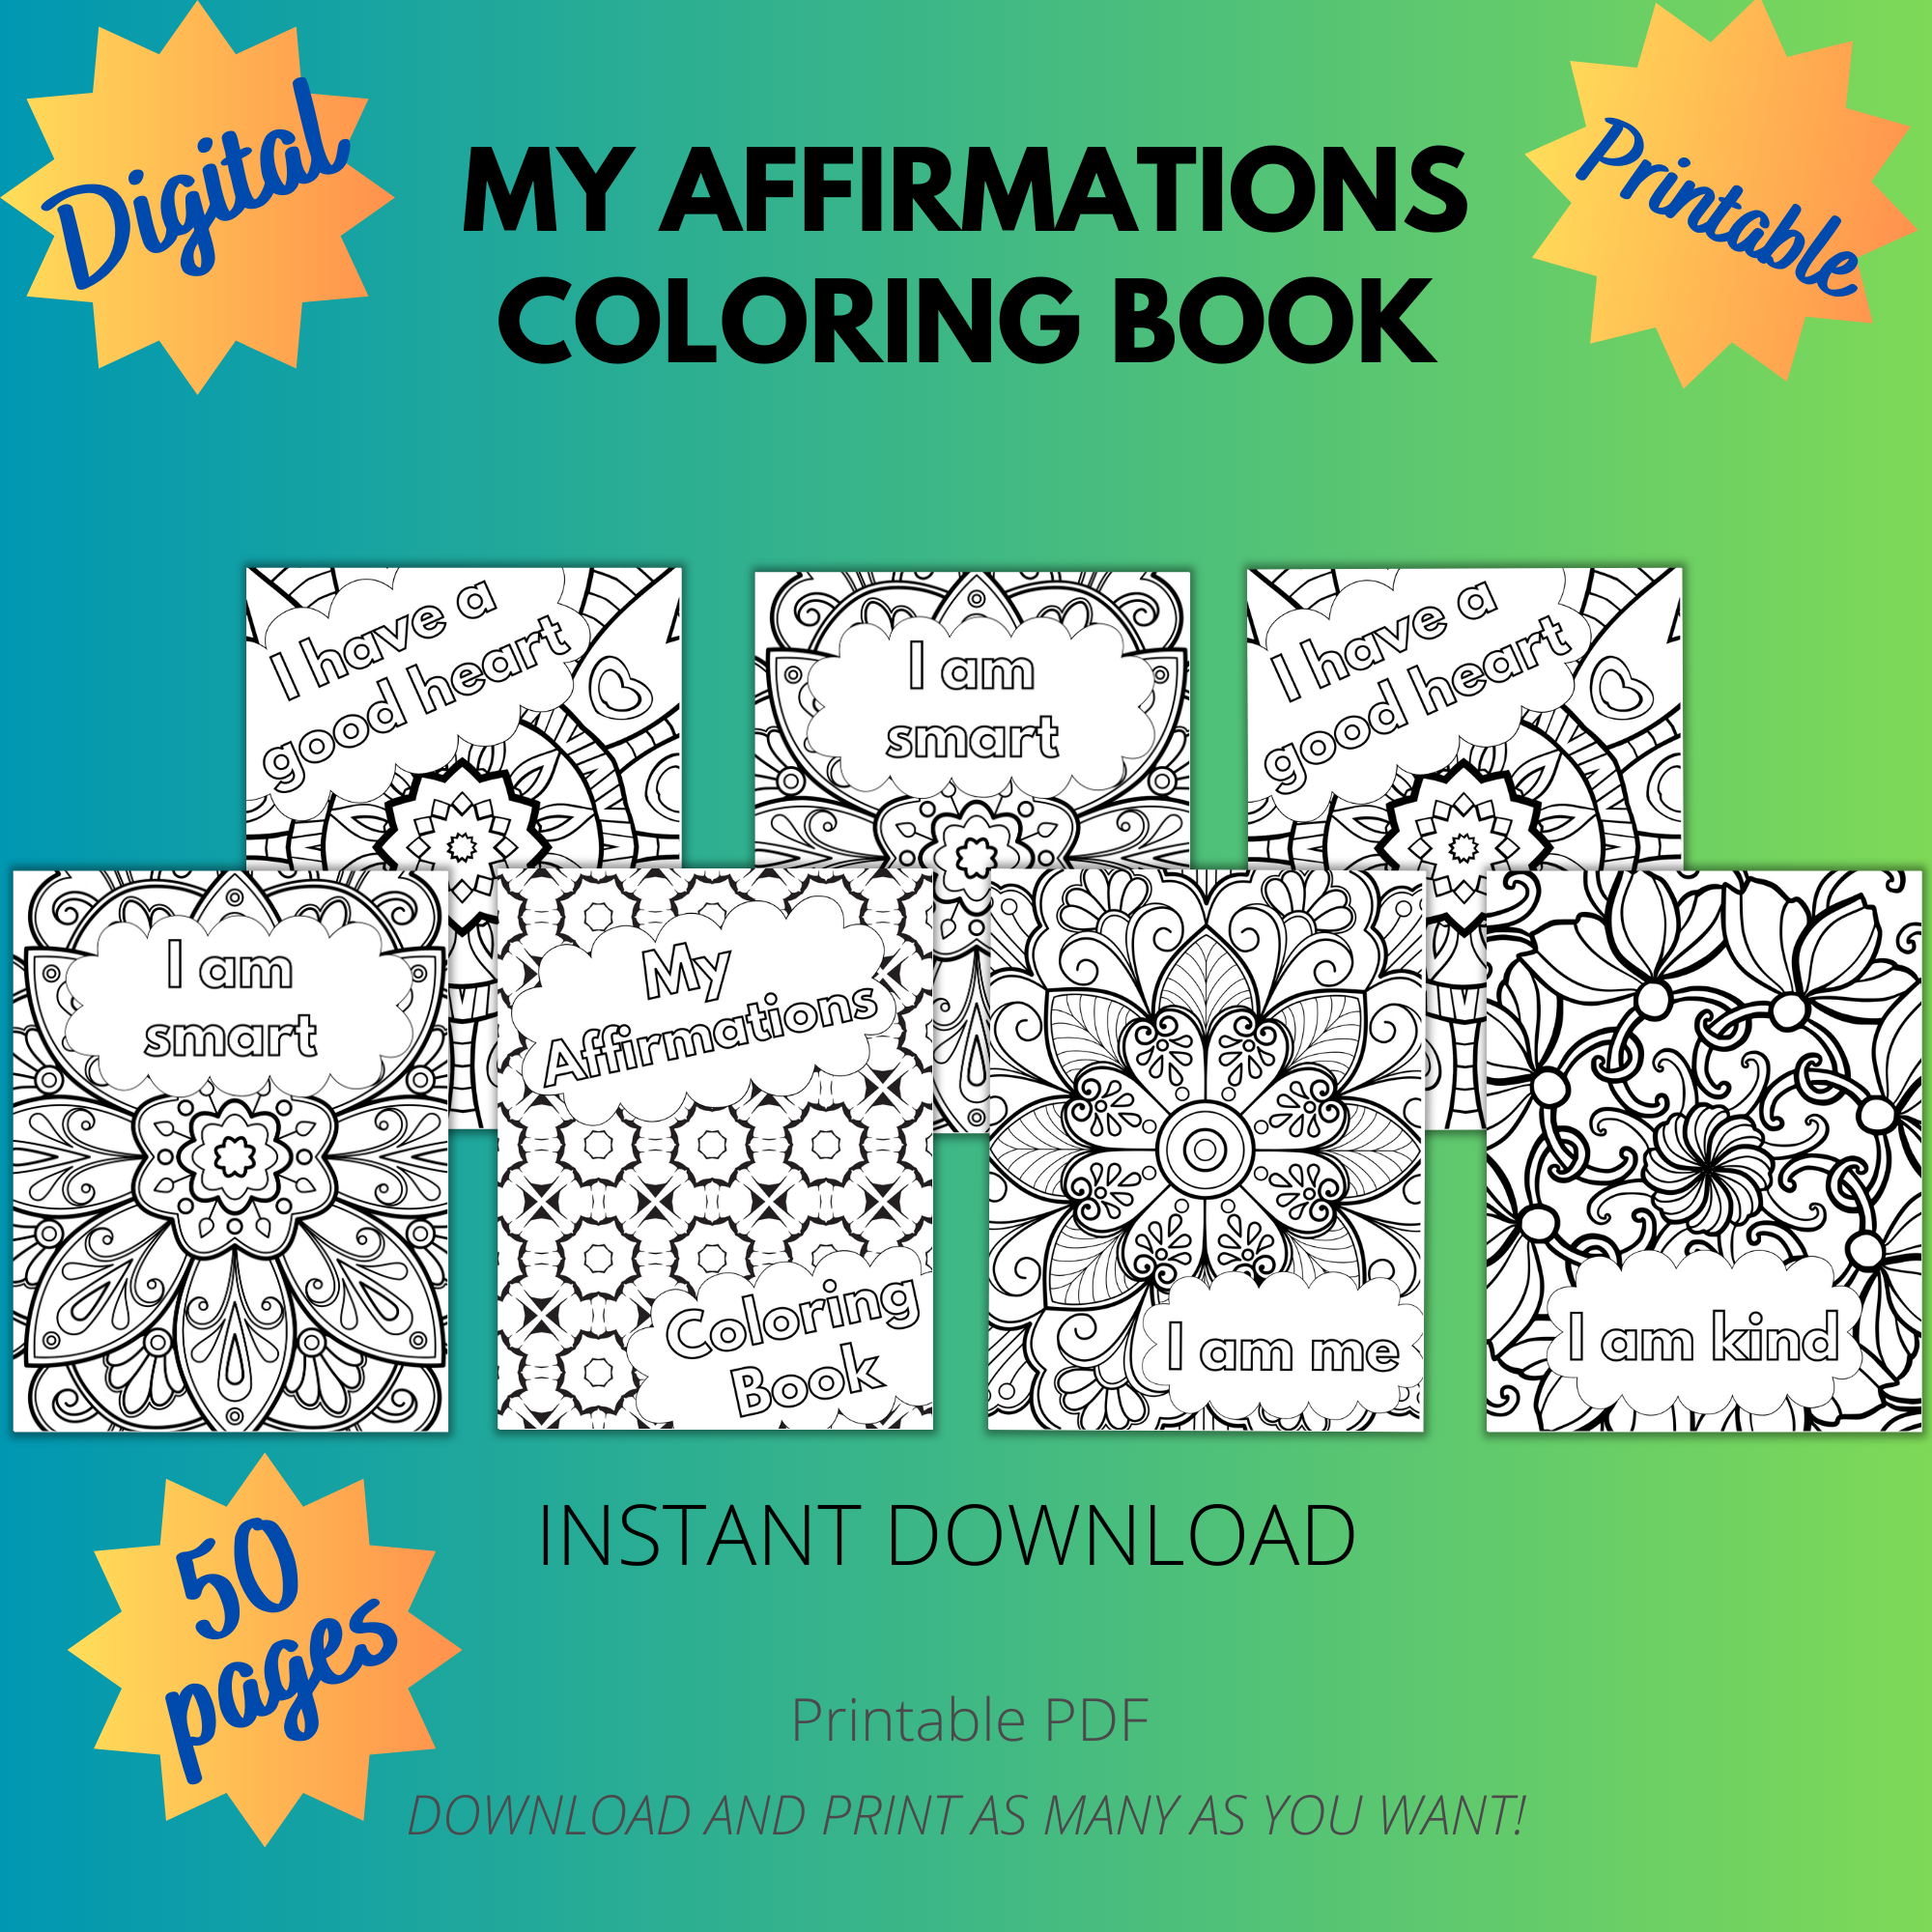 My Affirmations Coloring Book,Affirmations for kids,Affirmation Sayings,Inspirational Affirmations,Affirmation Pages